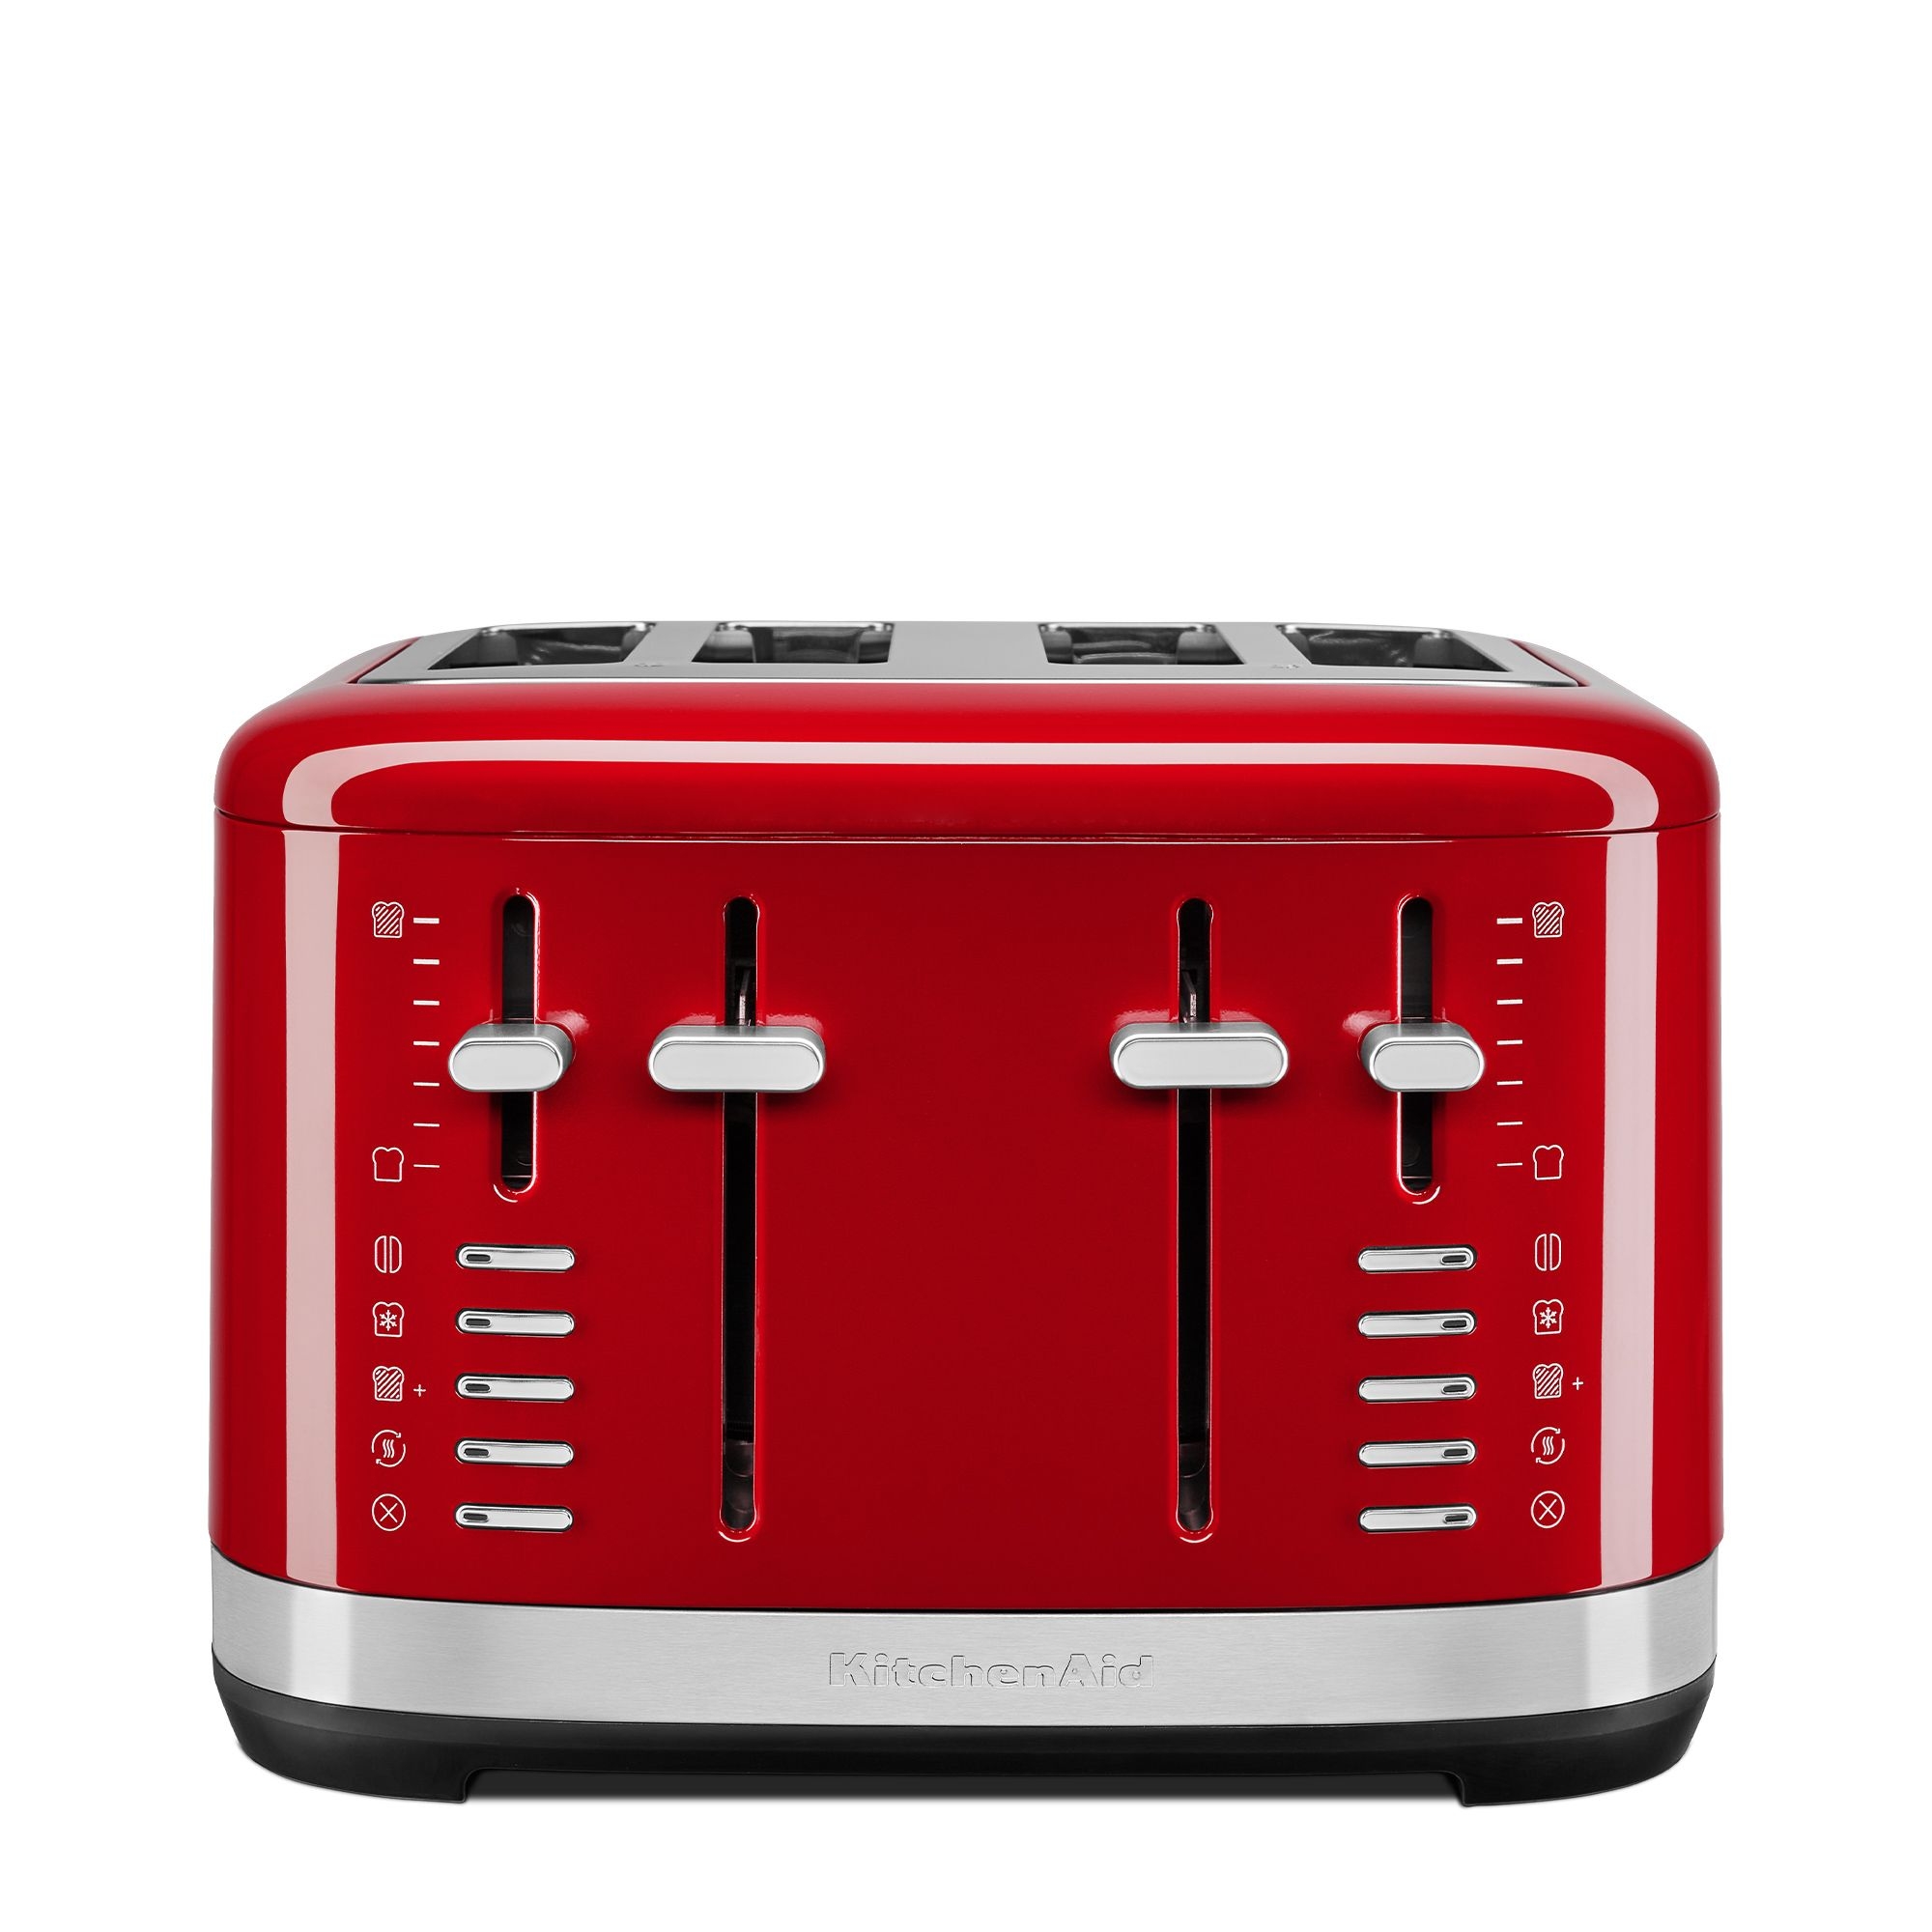 KitchenAid - Toaster with manual operation for 4 slices - Empire Red